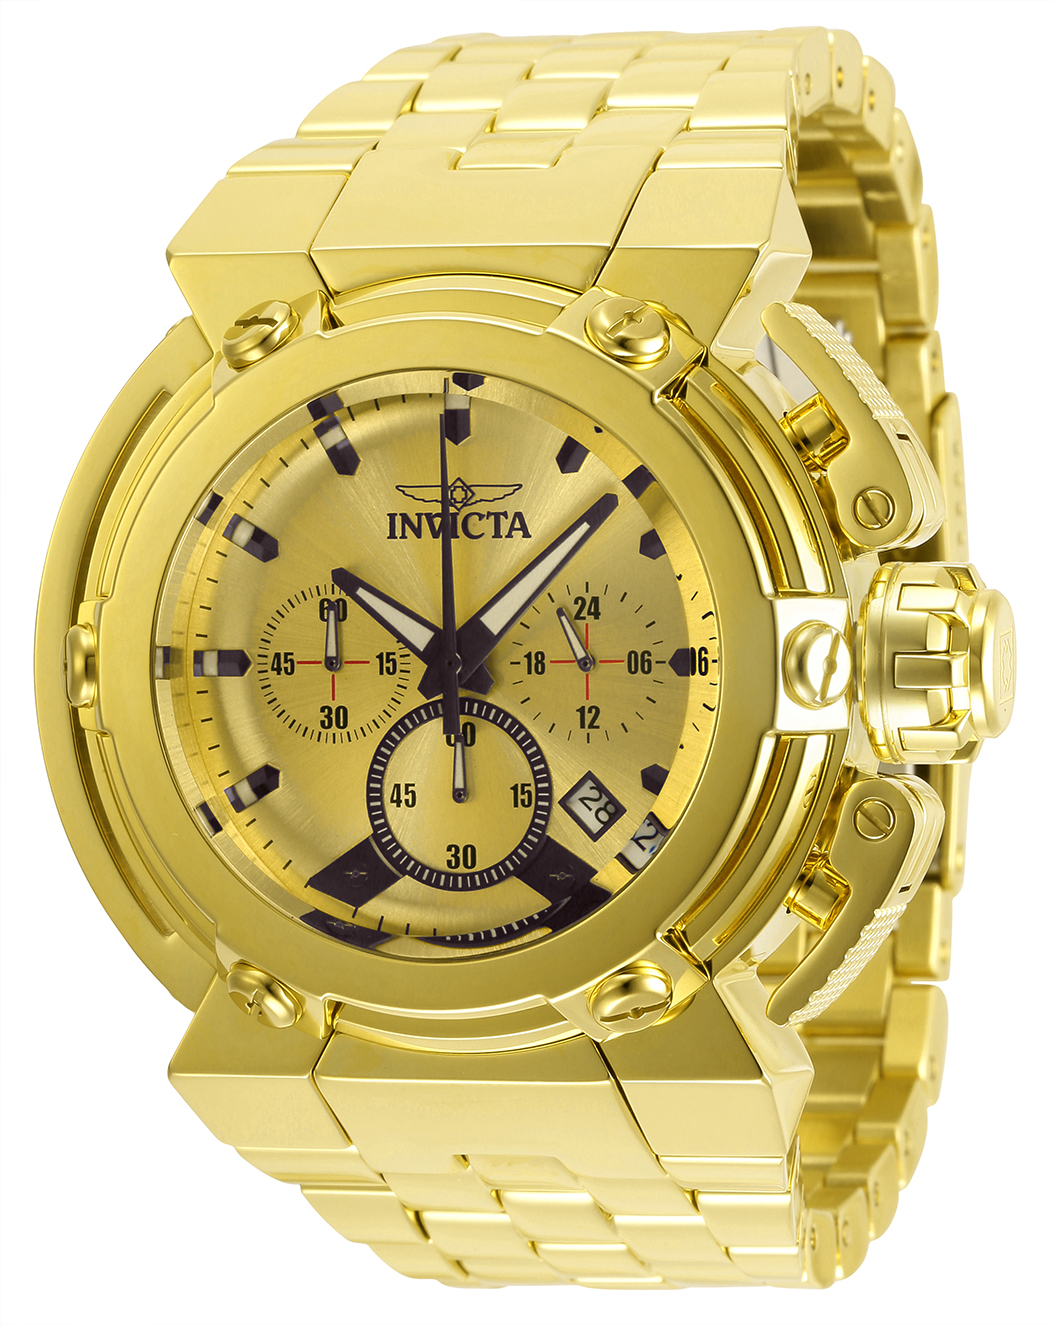 Invicta Coalition Forces X-Wing Men's Watch - 46mm, Gold (34870)